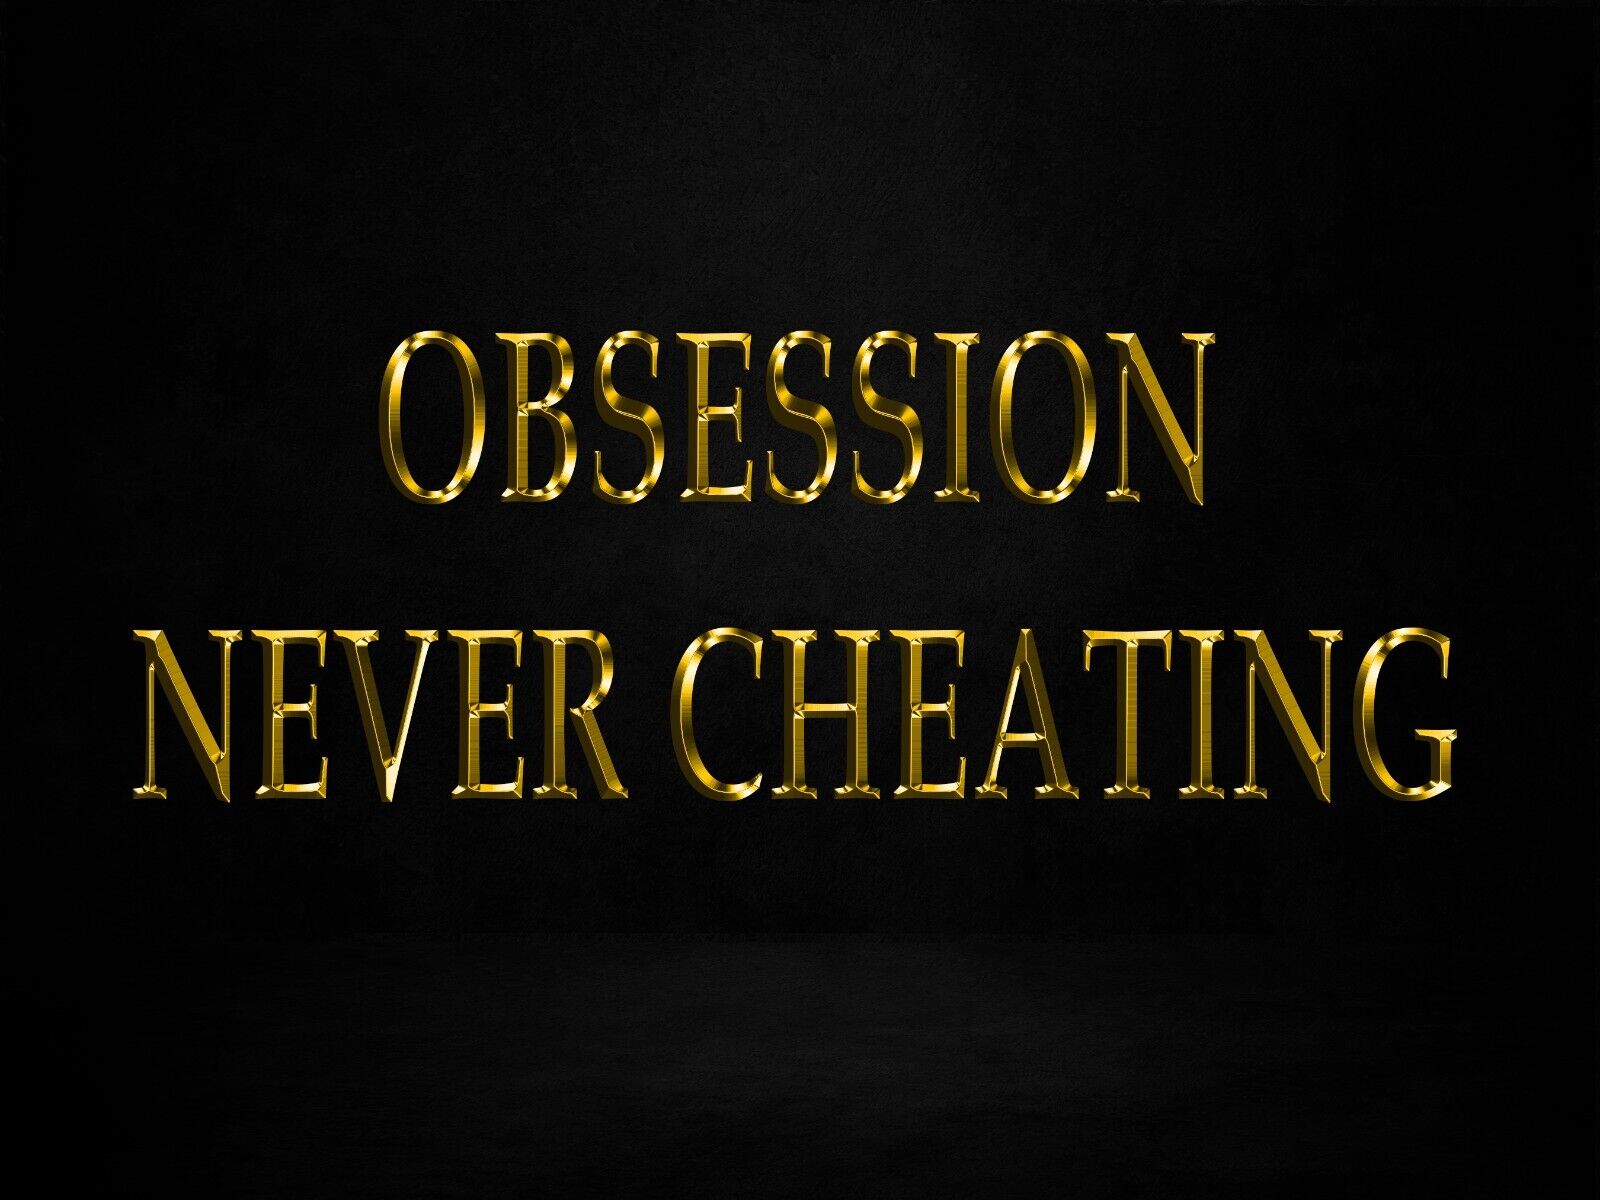 Obsession Never Cheating Stop cheating spell WITH A FREE RECORDING OF YOUR SPELL